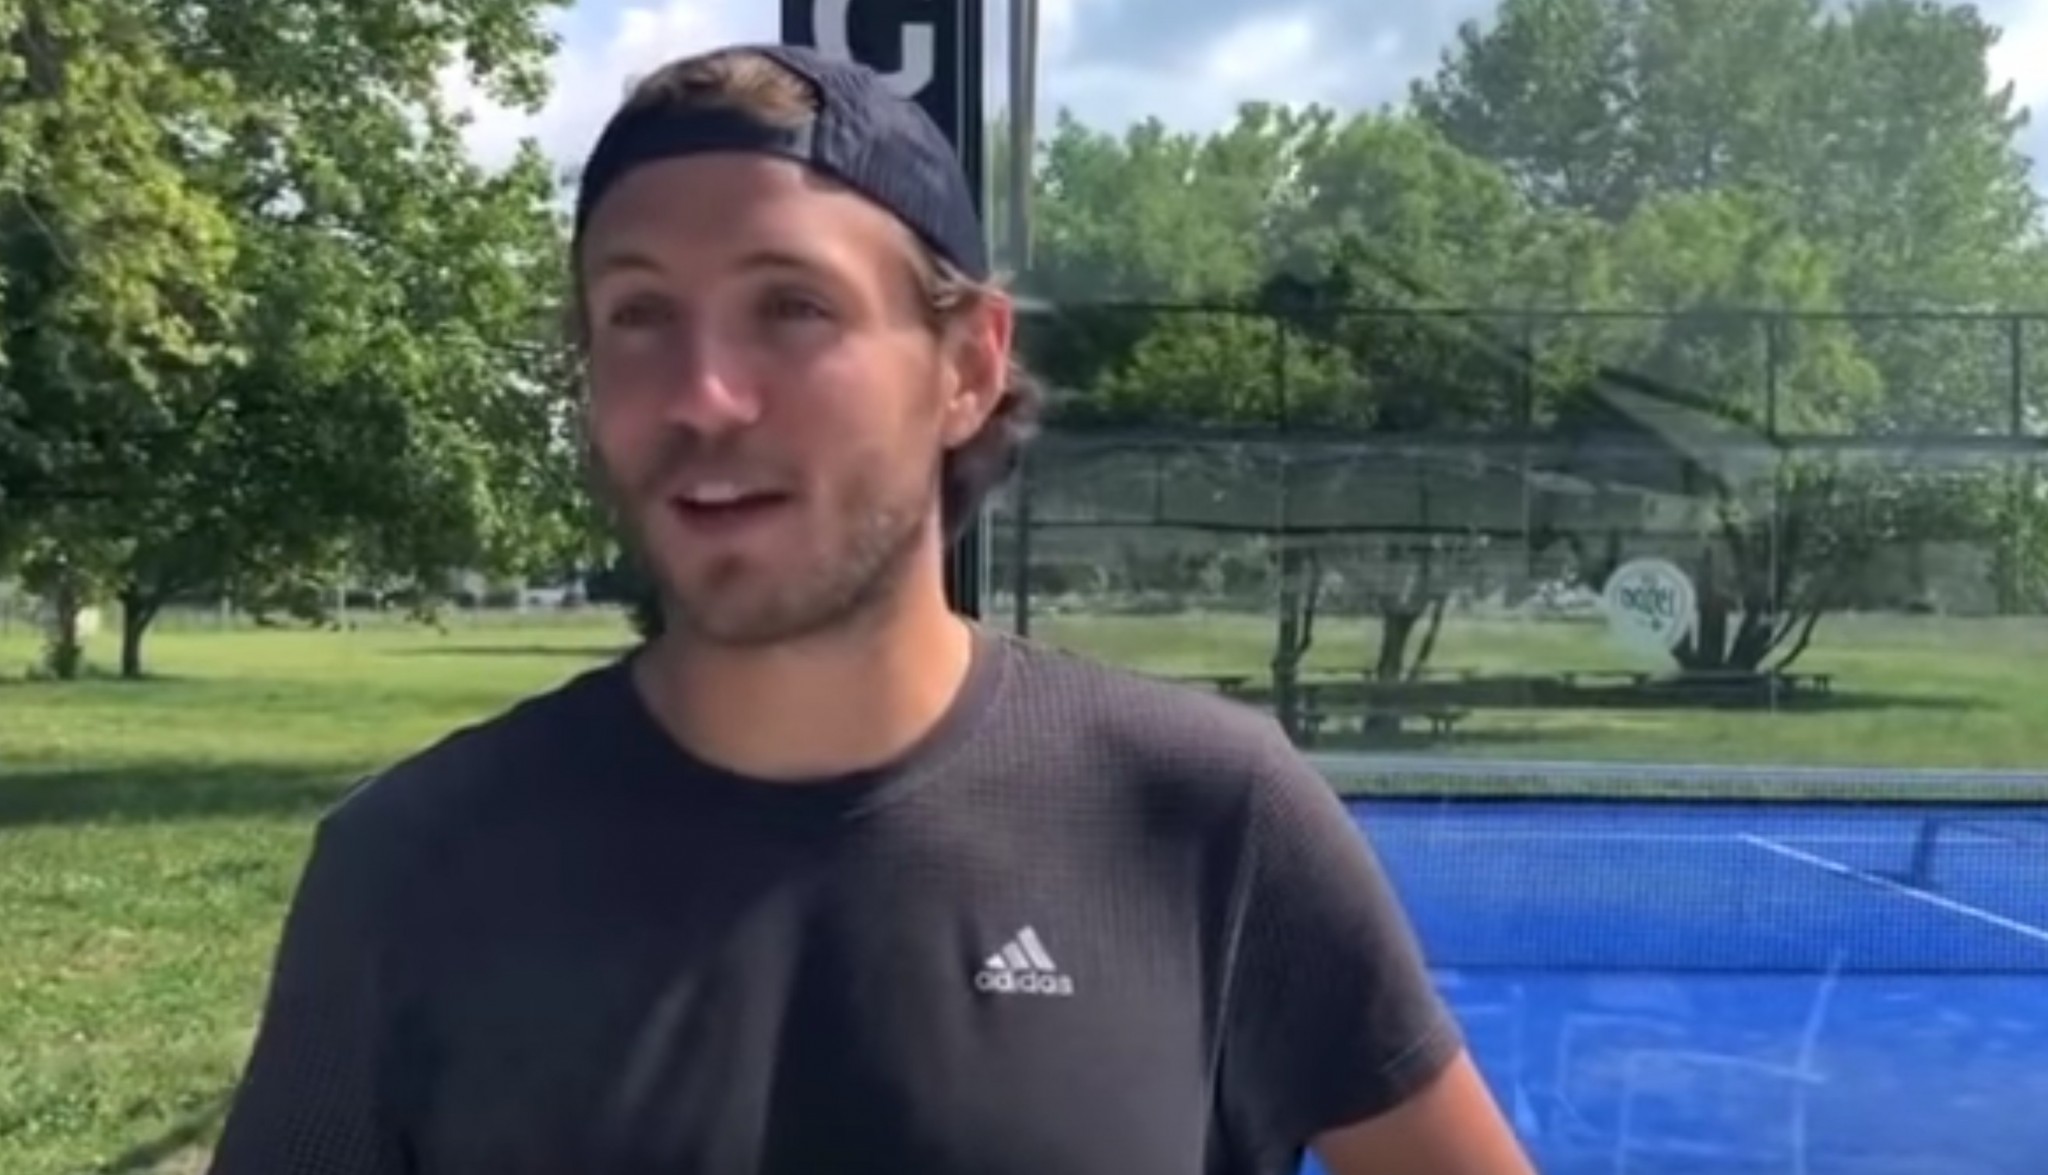 Lucas Pouille: “To padel, what I like is playing at 4 ”